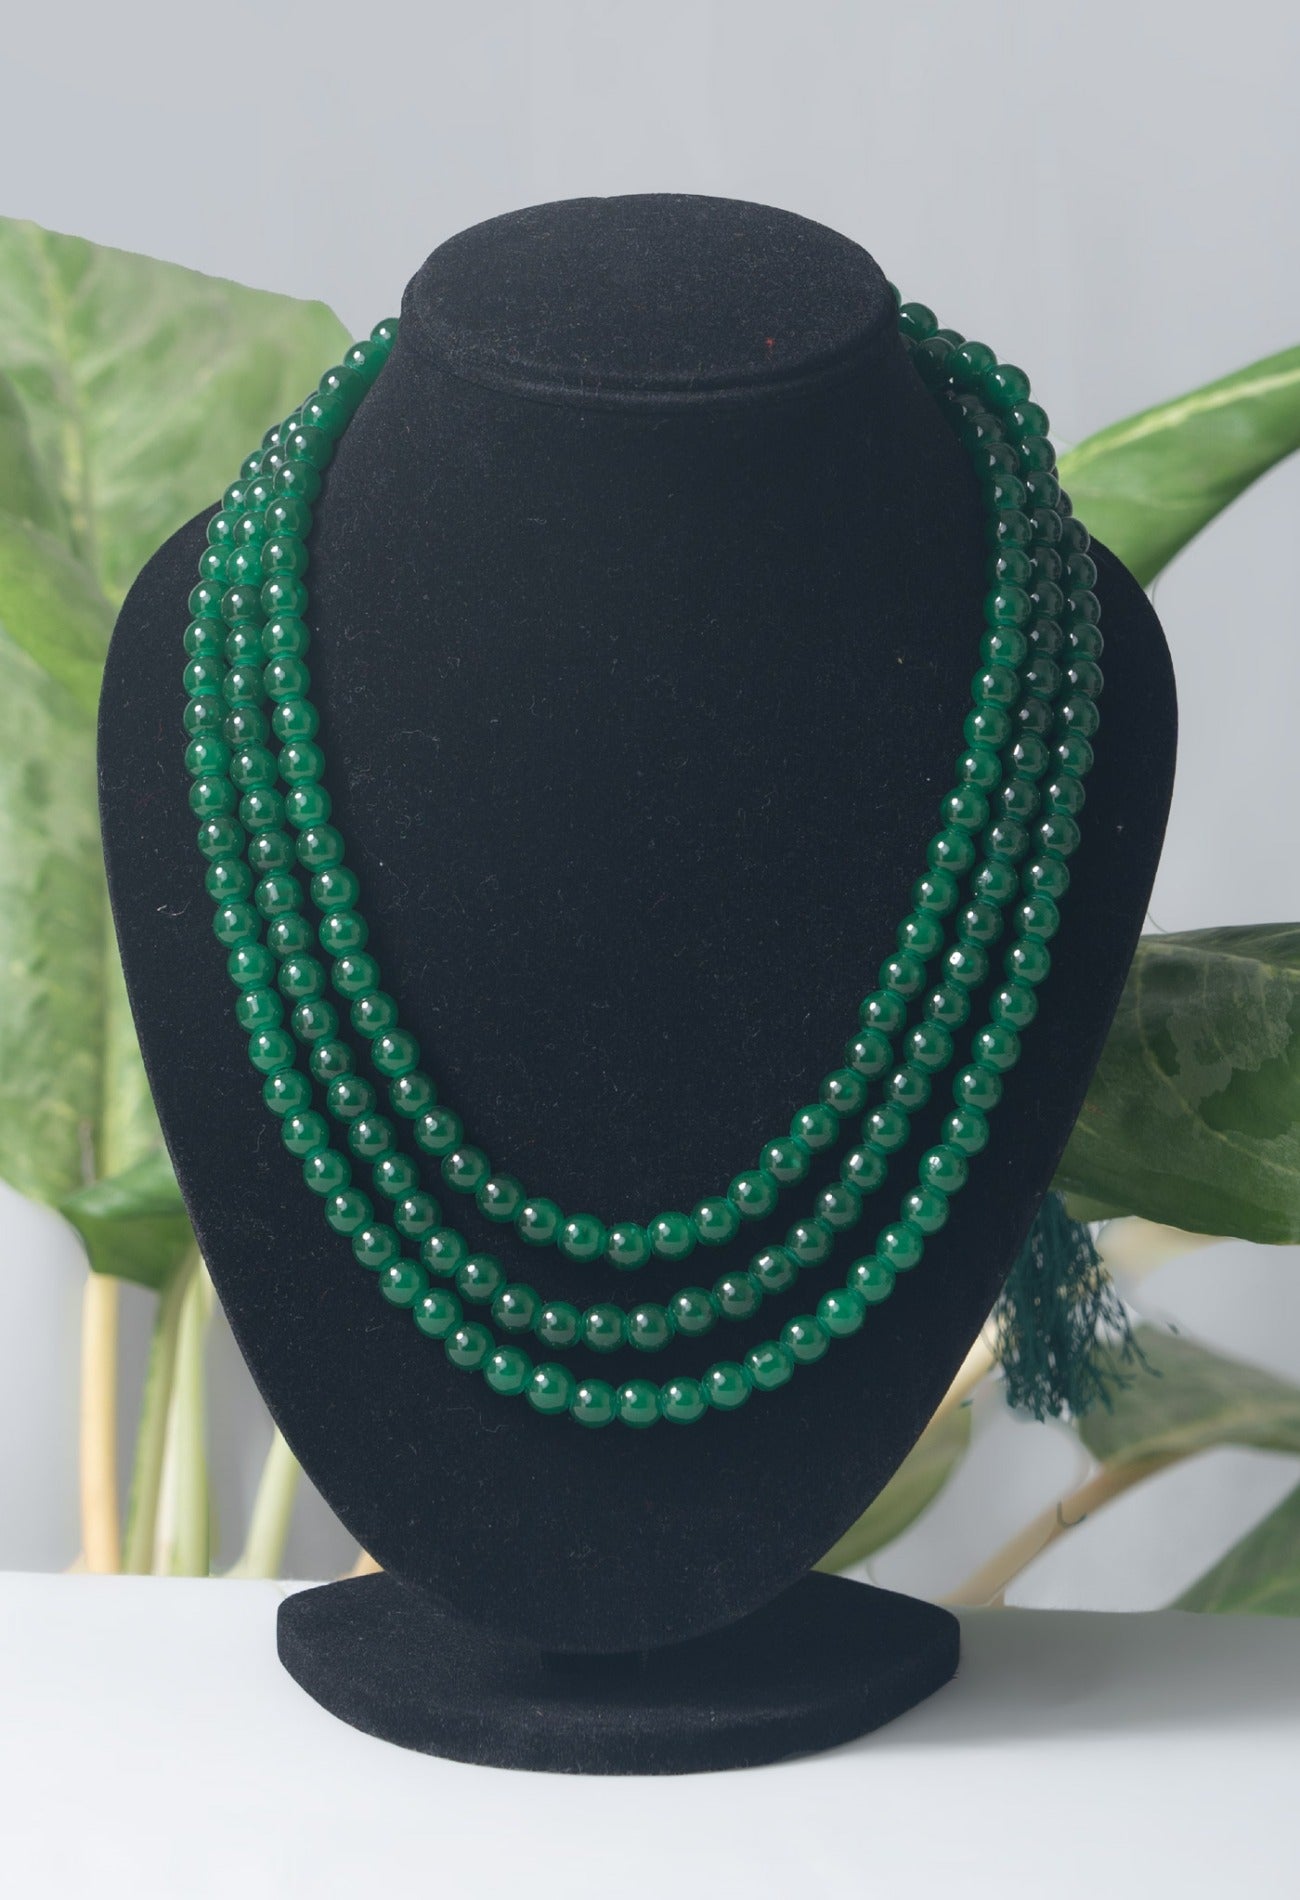 Online Shopping for Green Amravati Round Beads Necklace with Pendent with jewellery from Andhra pradesh at Unnatisilks.com India
